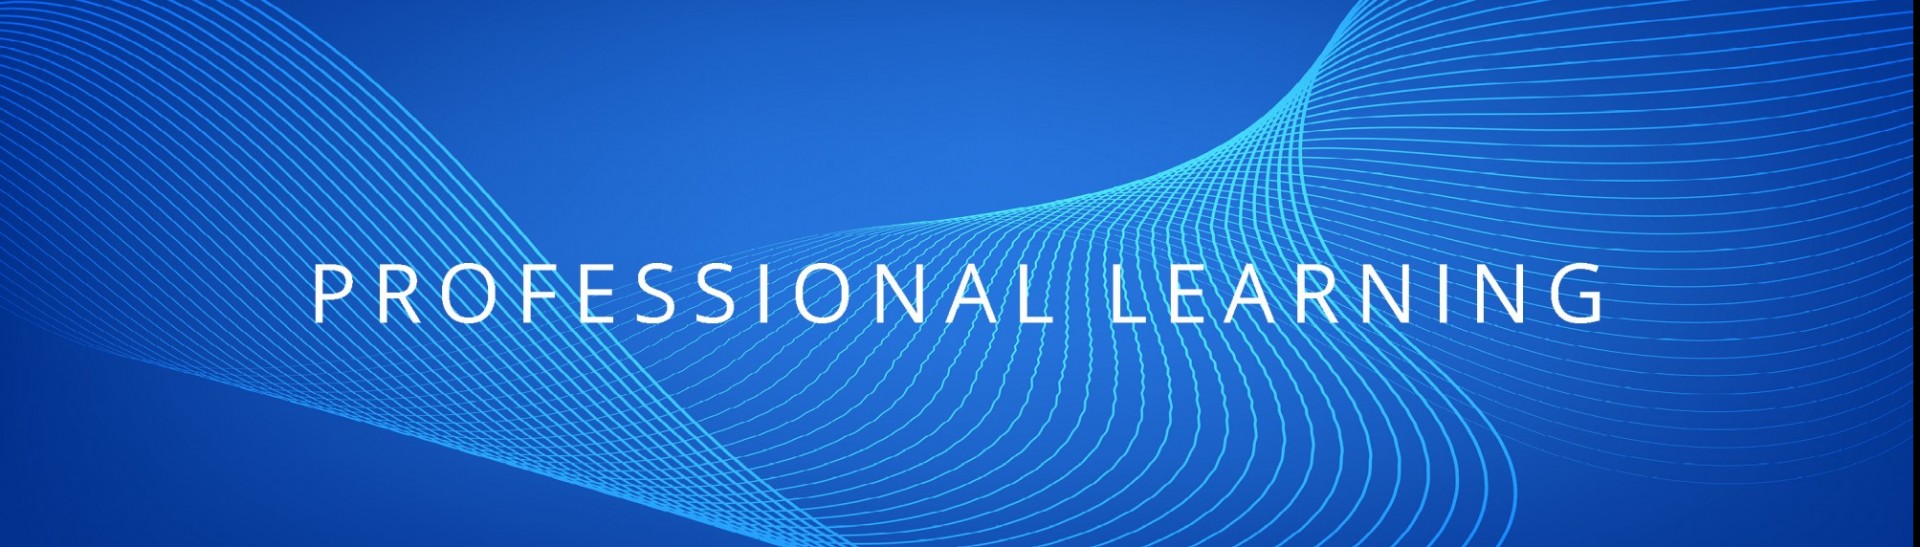 Blue background with white text saying "professional learning"